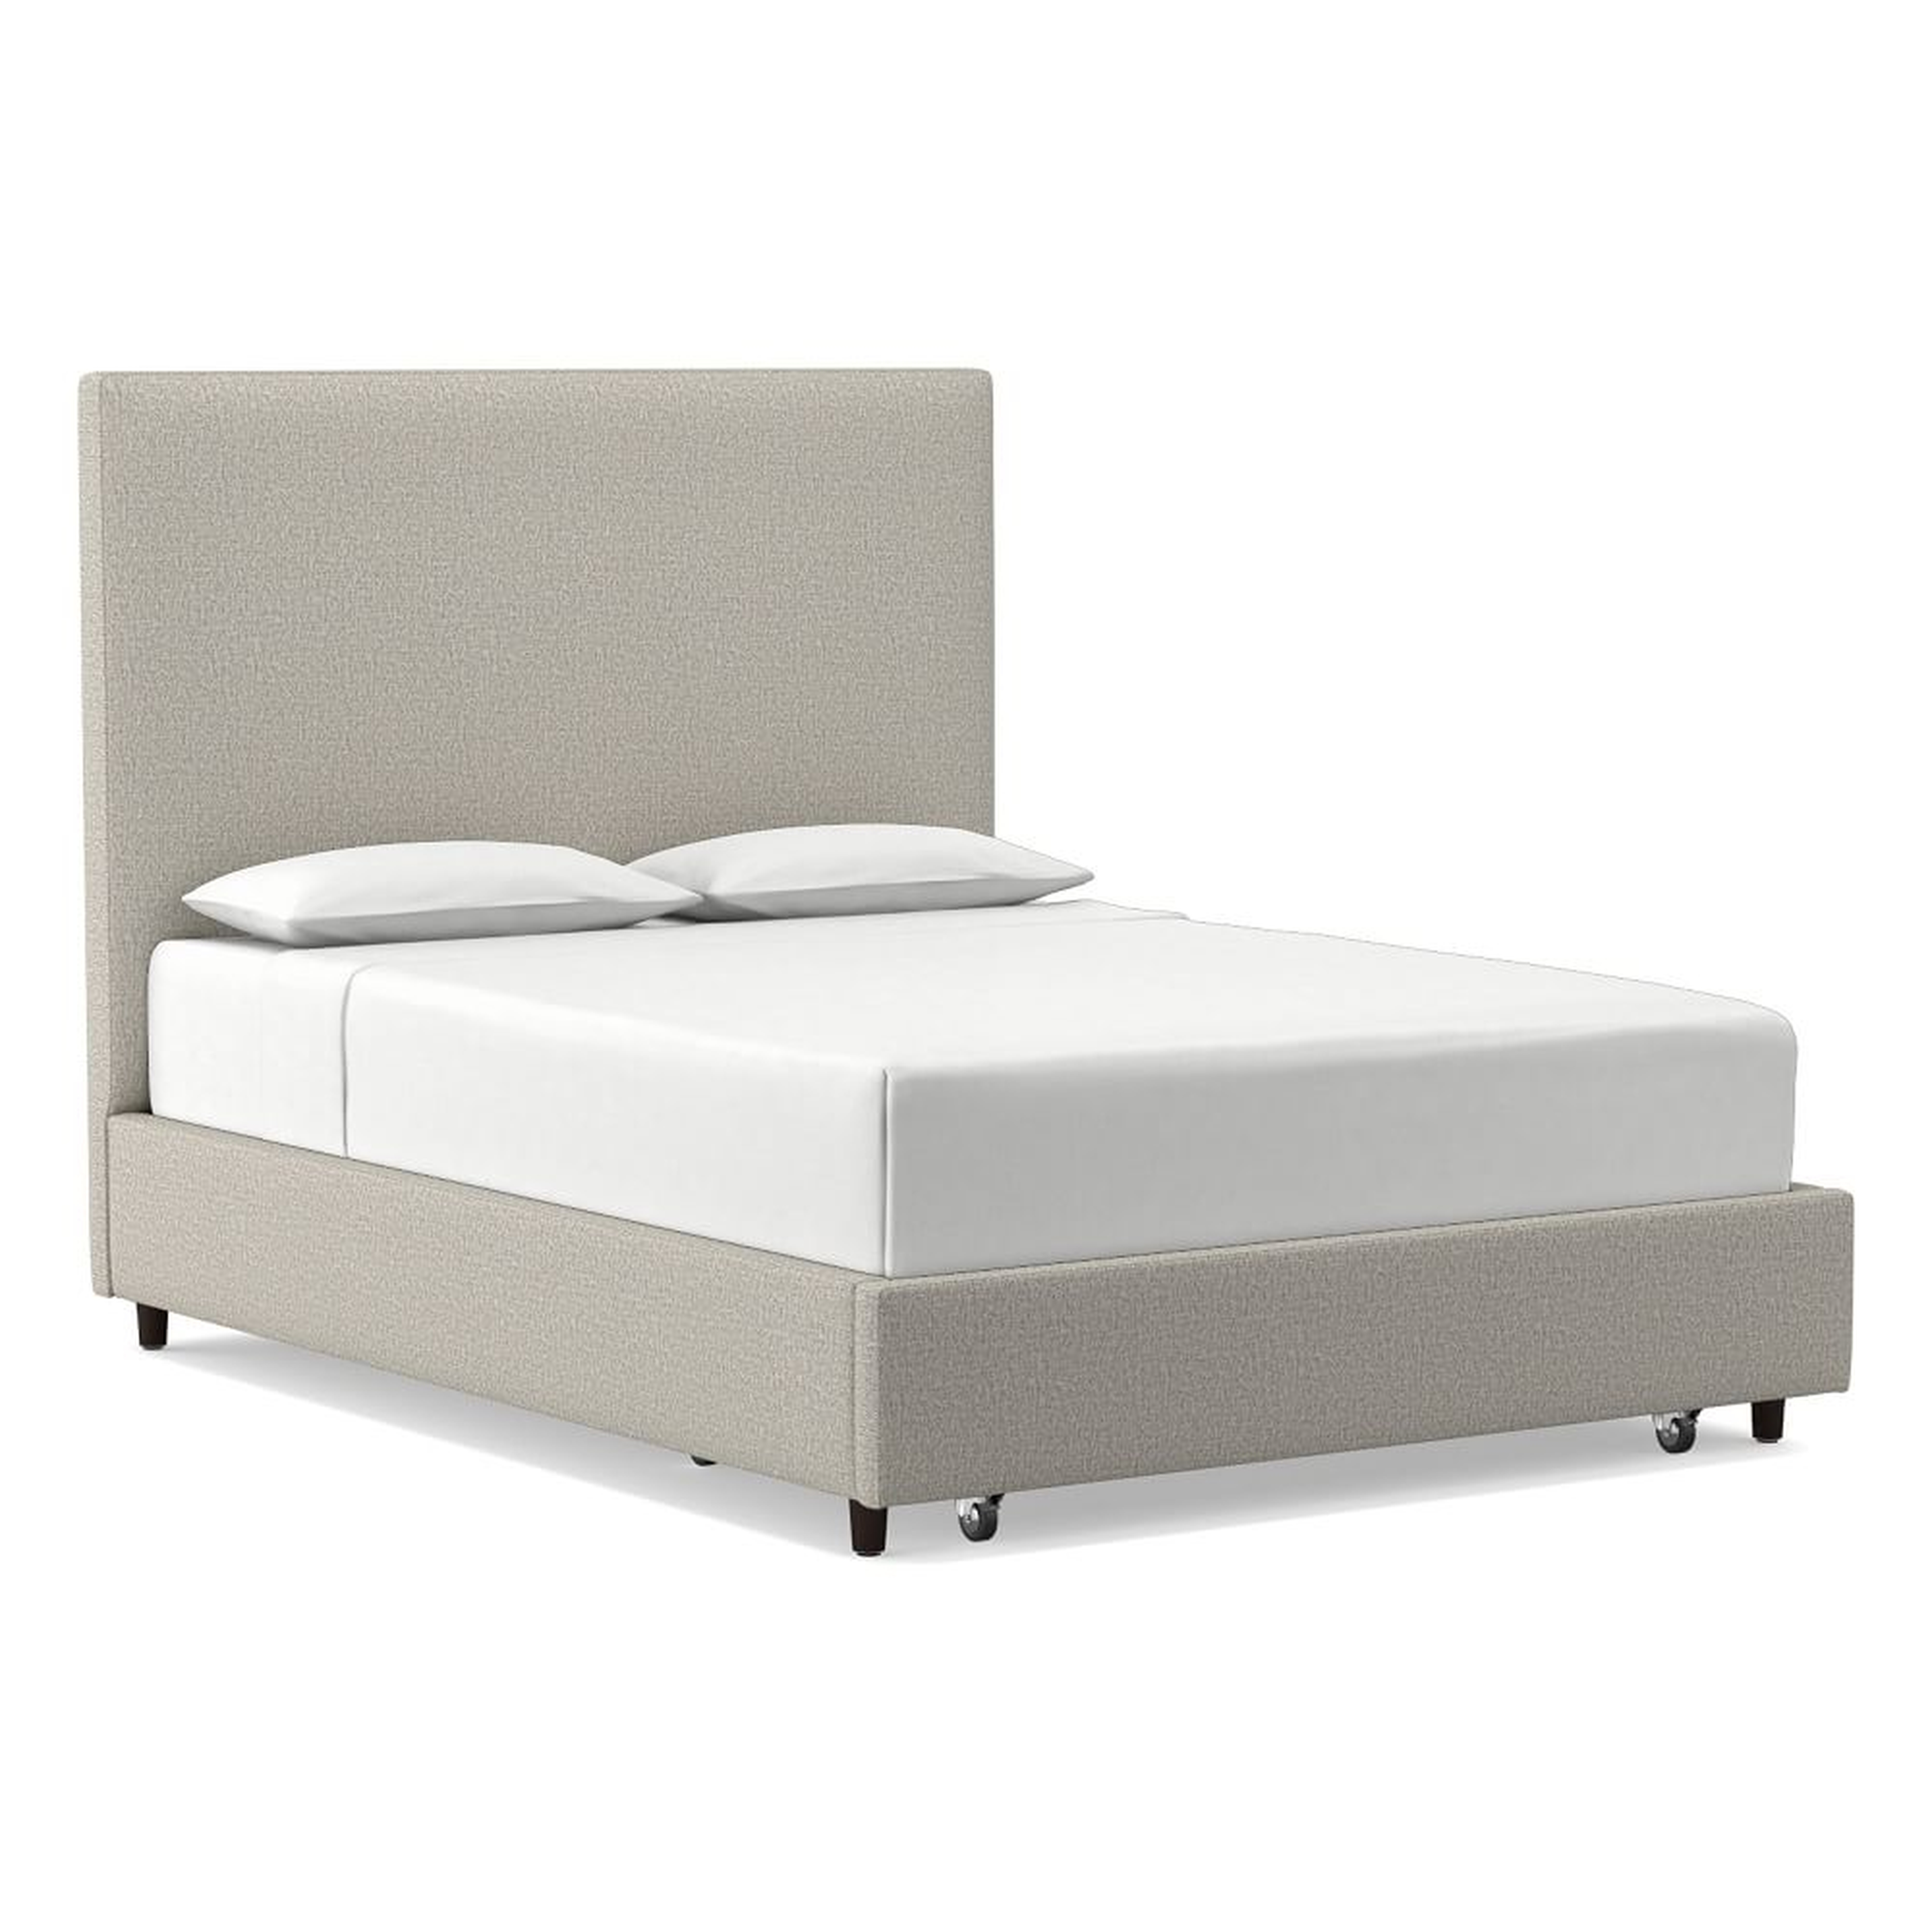 Tall Contemporary Storage Bed, Full, Twill, Dove - West Elm